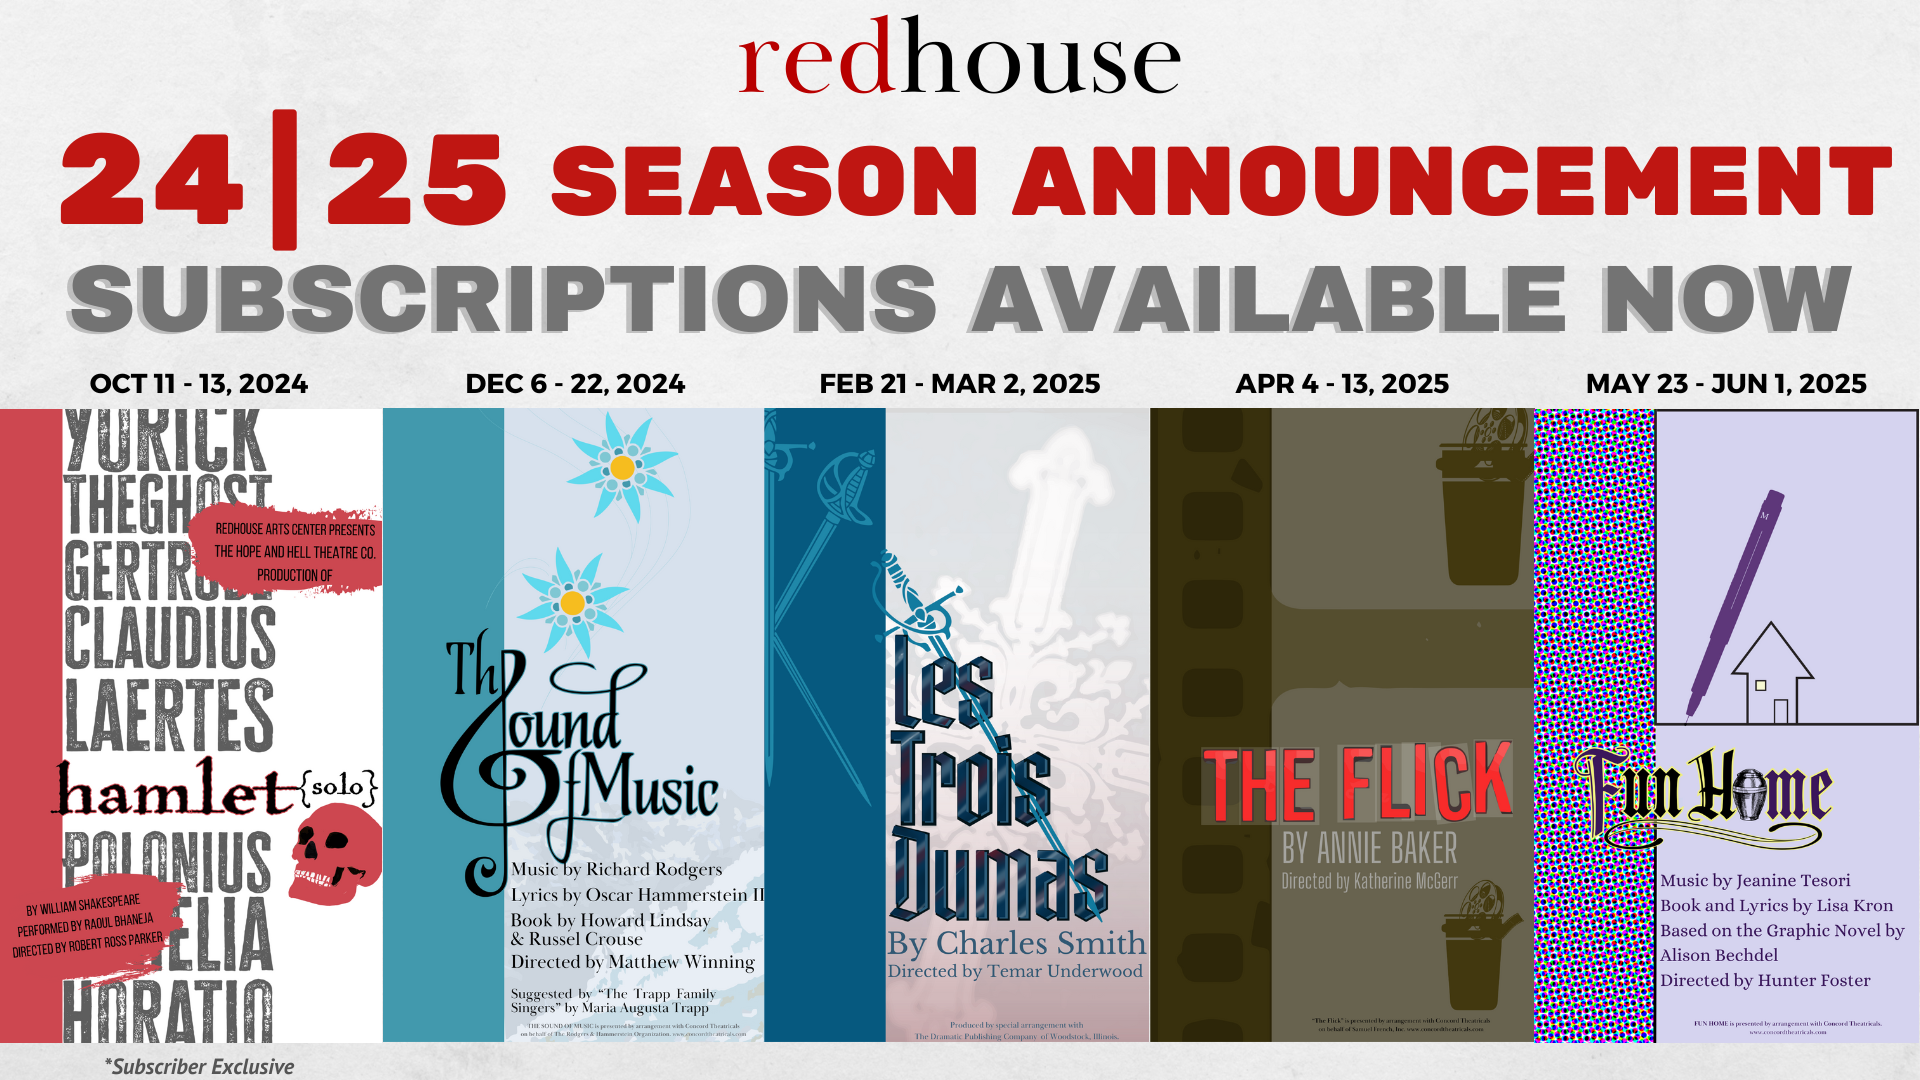 Show Details: 24/25 Season Subscriptions Available Now